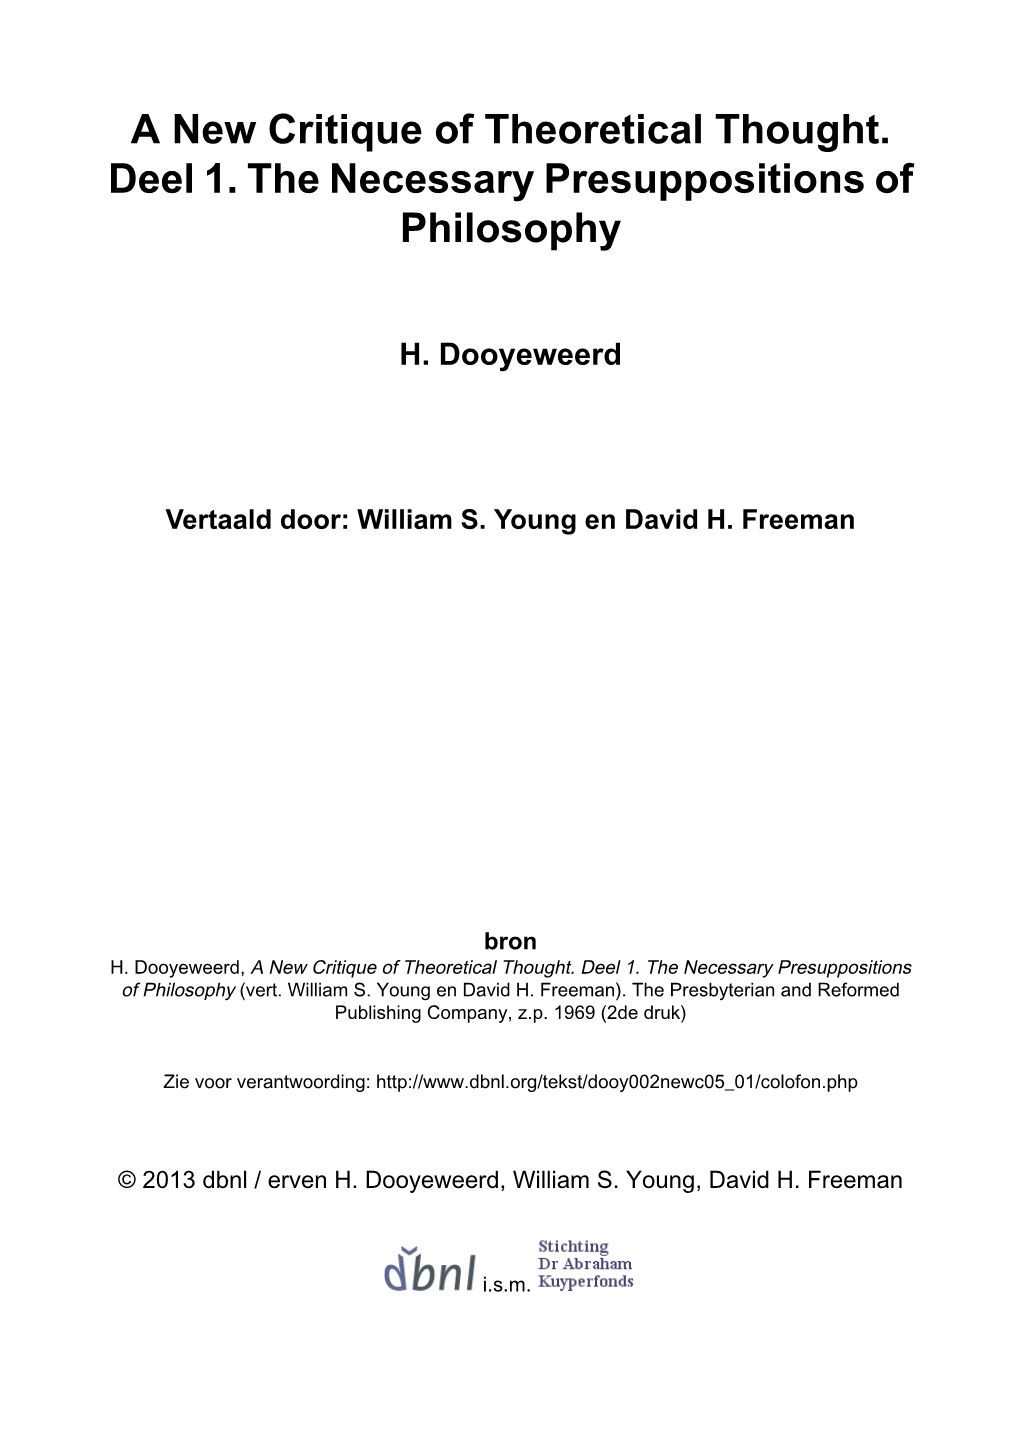 A New Critique of Theoretical Thought. Deel 1. the Necessary Presuppositions of Philosophy